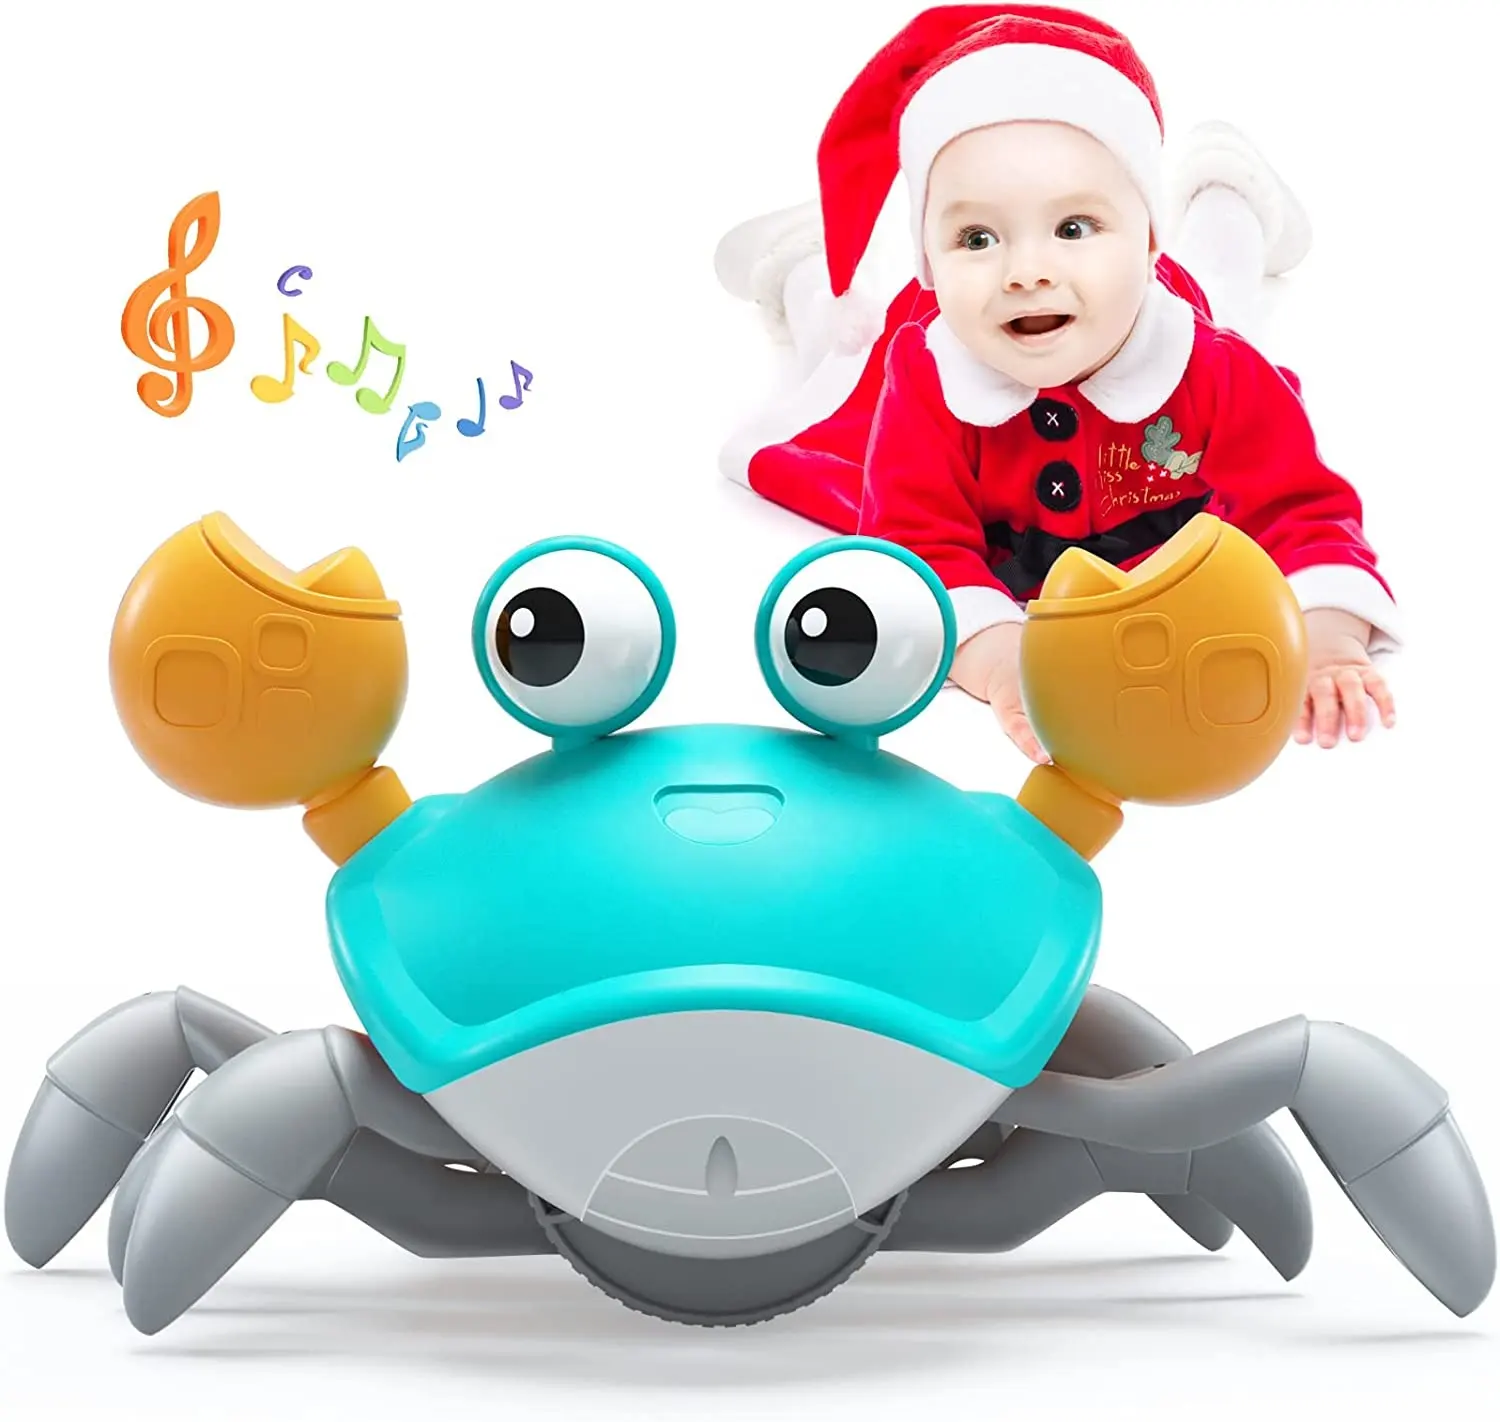 USB Rechargeable Crawling Crab Baby Toy Cute Dancing Walking Moving Sensory Induction Crabs with Light Up Music for Toddler